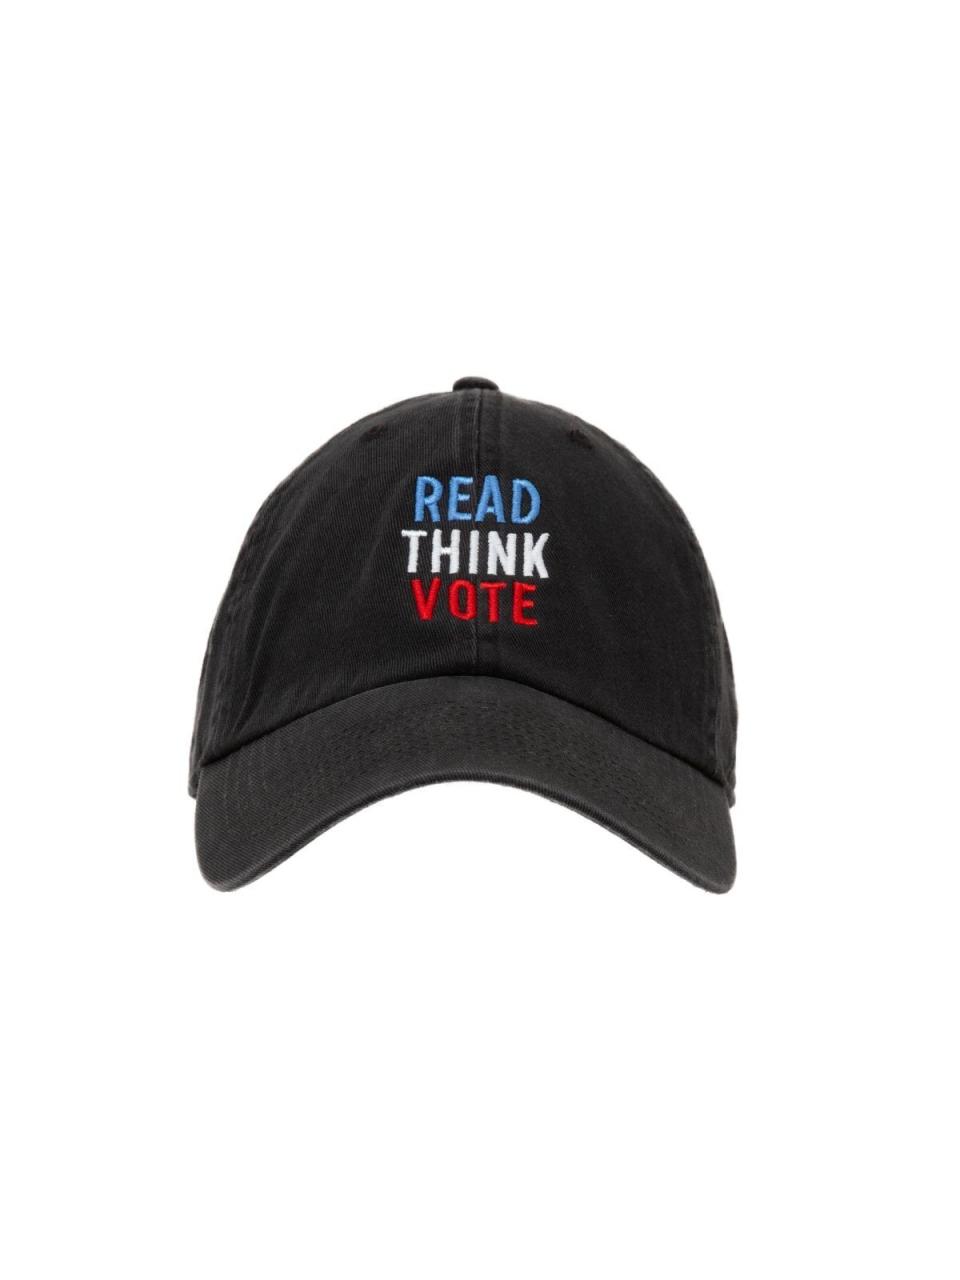 Get the <a href="https://outofprint.com/products/read-think-vote-cap?utm_source=google&amp;utm_medium=cpc&amp;utm_term=&amp;utm_campaign=g-US-smartshopping&amp;utm_content=309924858691&amp;gclid=EAIaIQobChMIiq2wwuup6wIVEm-GCh3P1APeEAQYAiABEgLz0_D_BwE" target="_blank" rel="noopener noreferrer">Out of Print read think vote cap﻿</a> for $18.